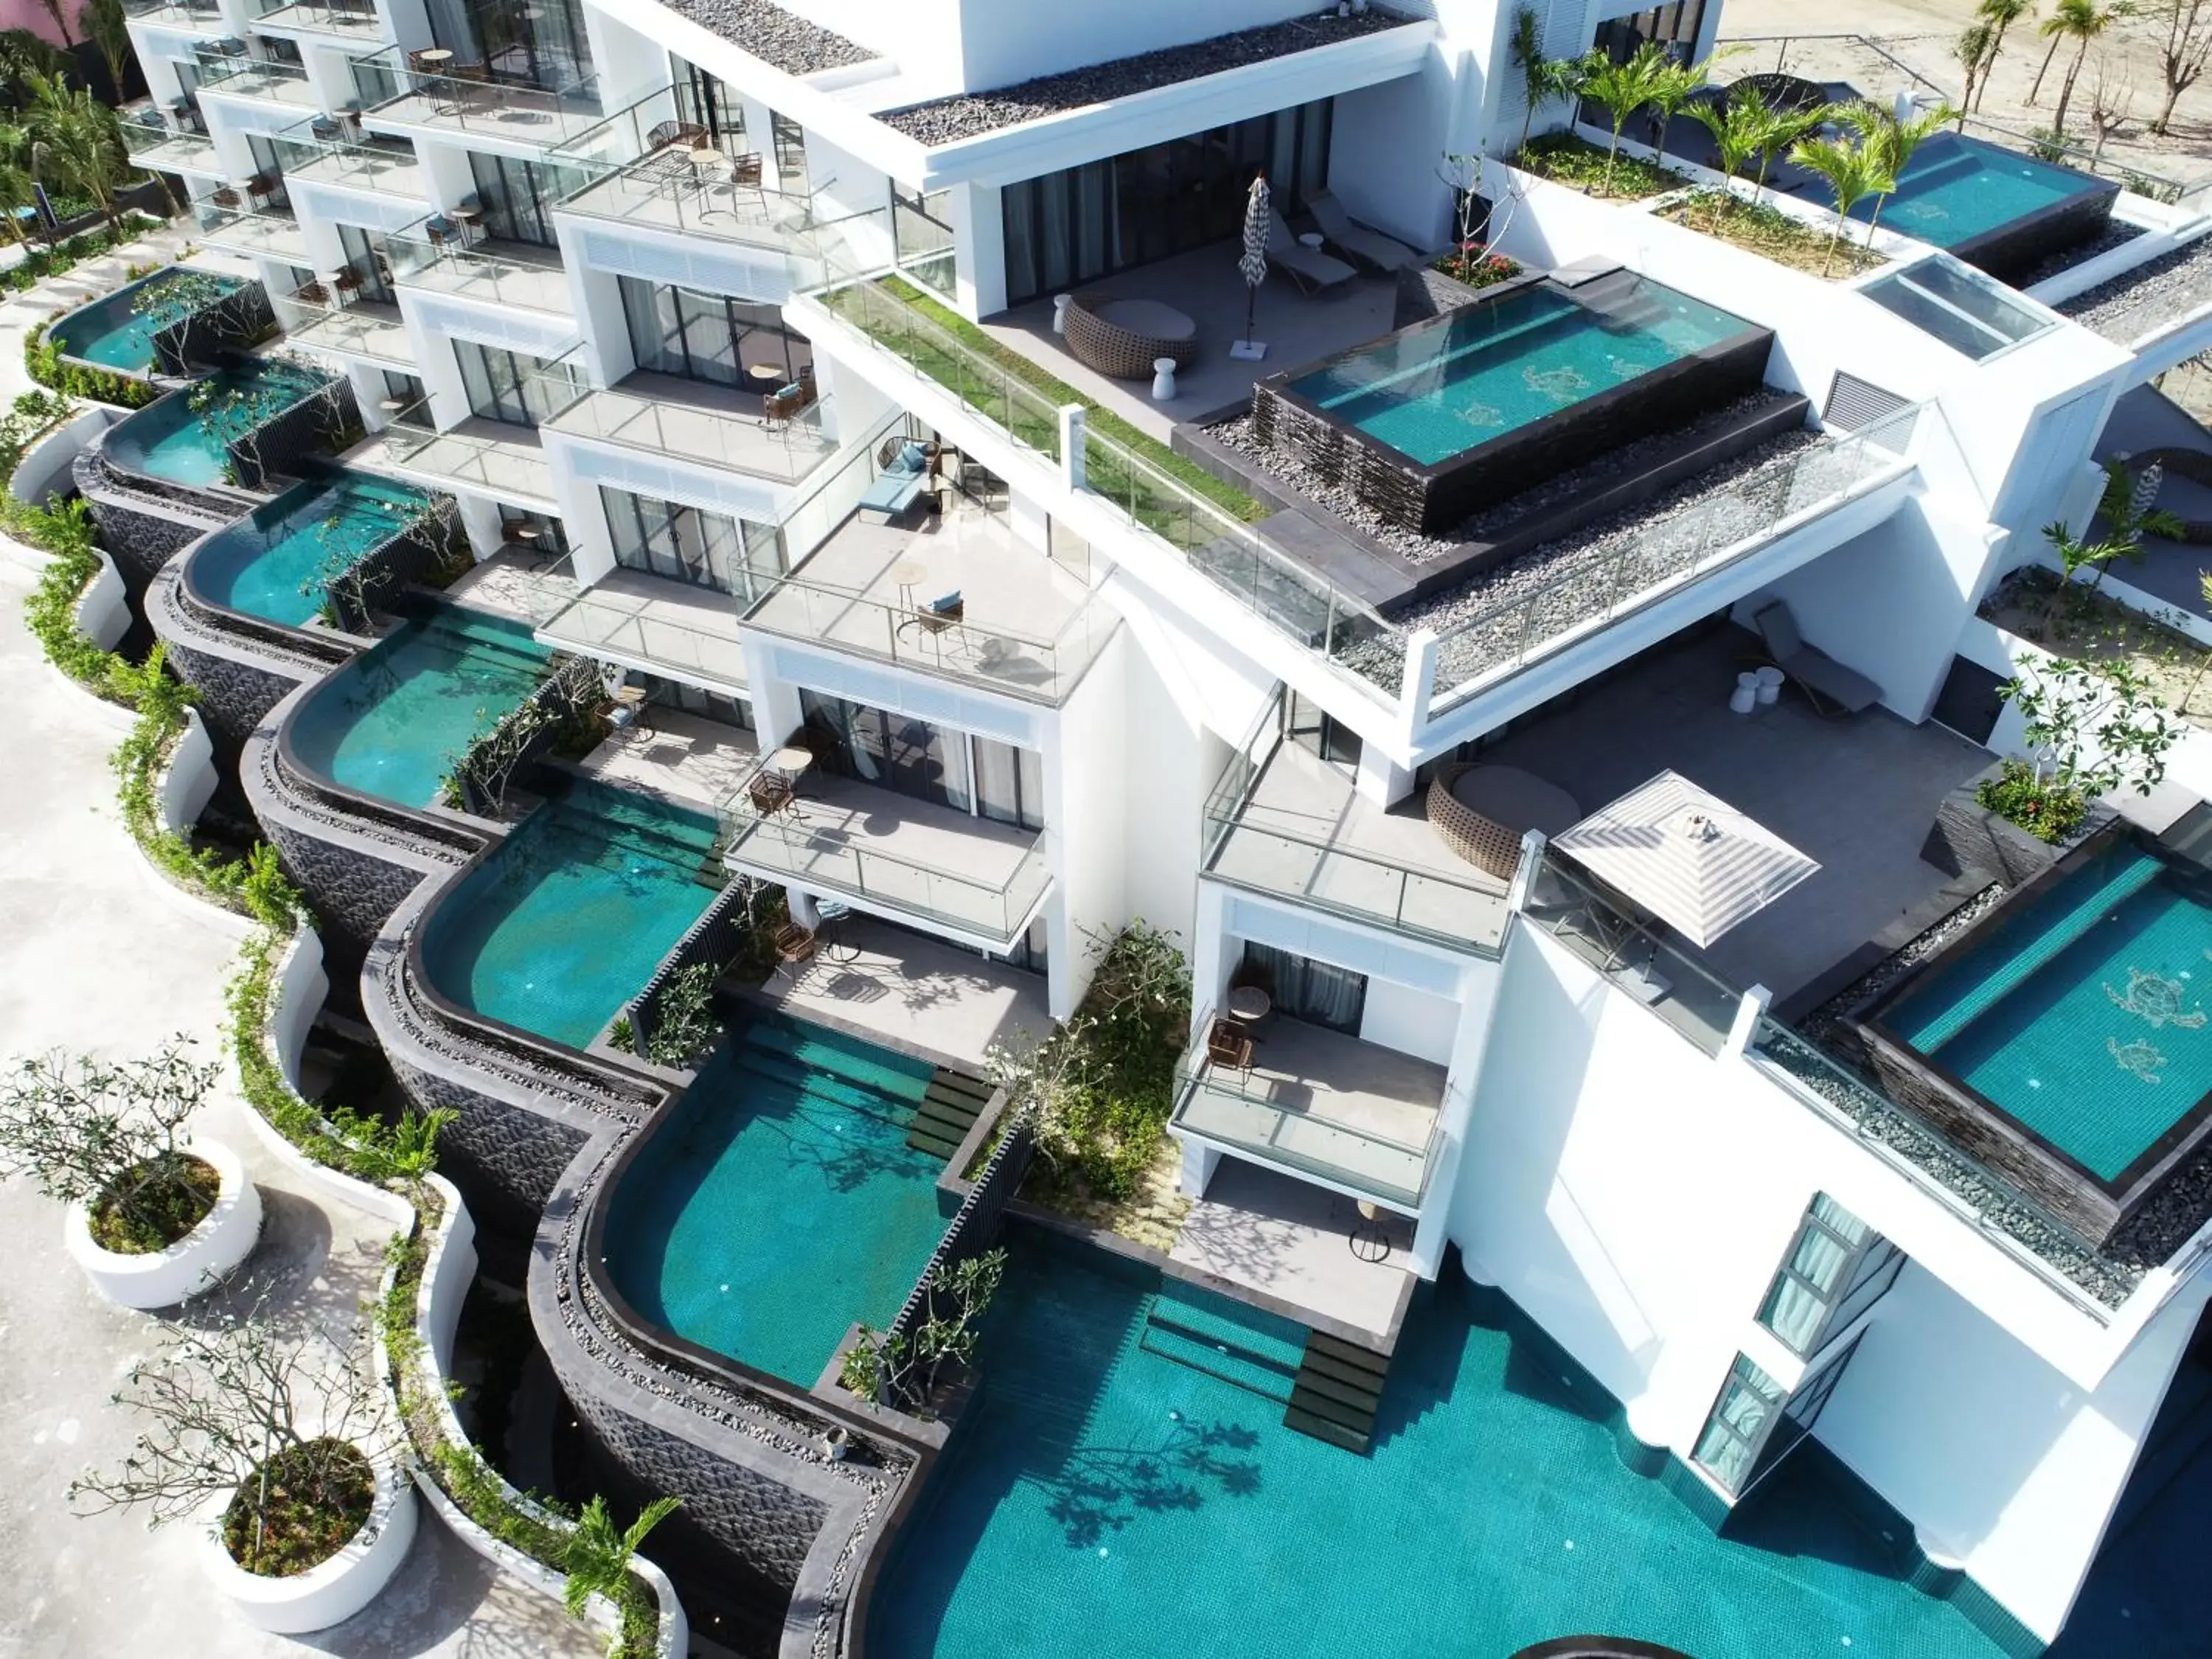 Property building, Pool View in Premier Residences Phu Quoc Emerald Bay Managed by Accor